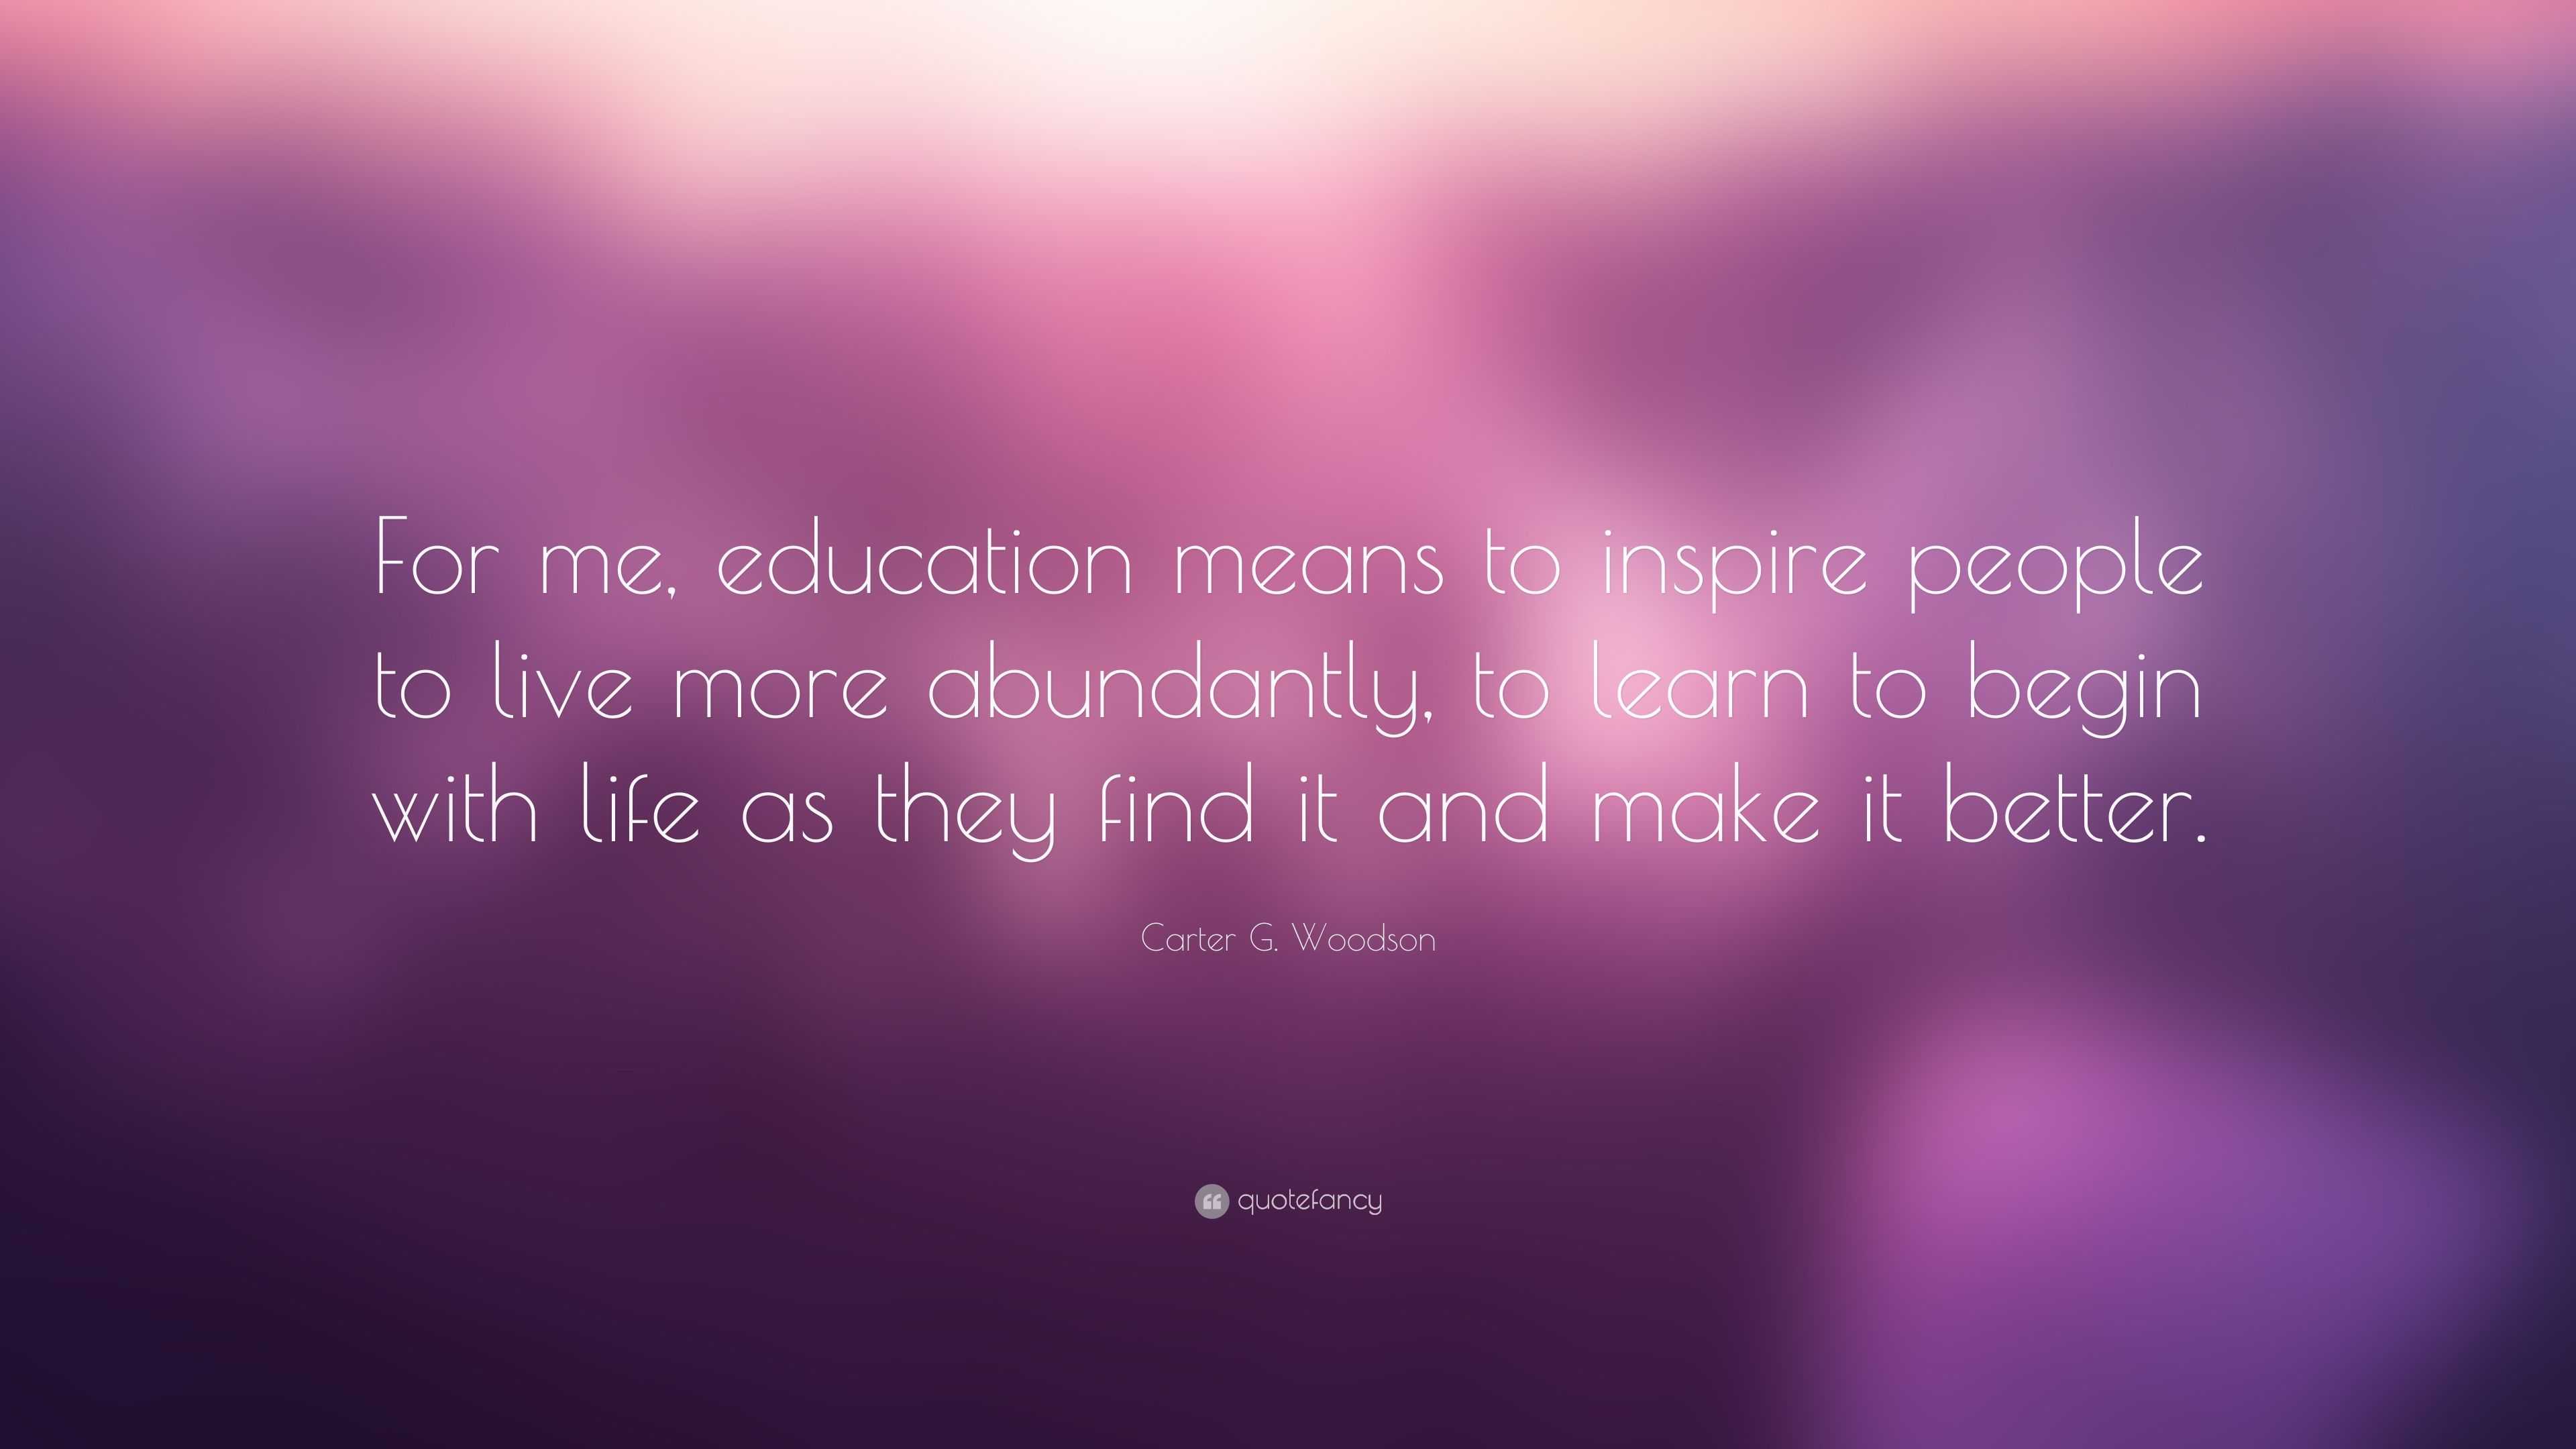 Carter G Woodson Quote “For me education means to inspire people to